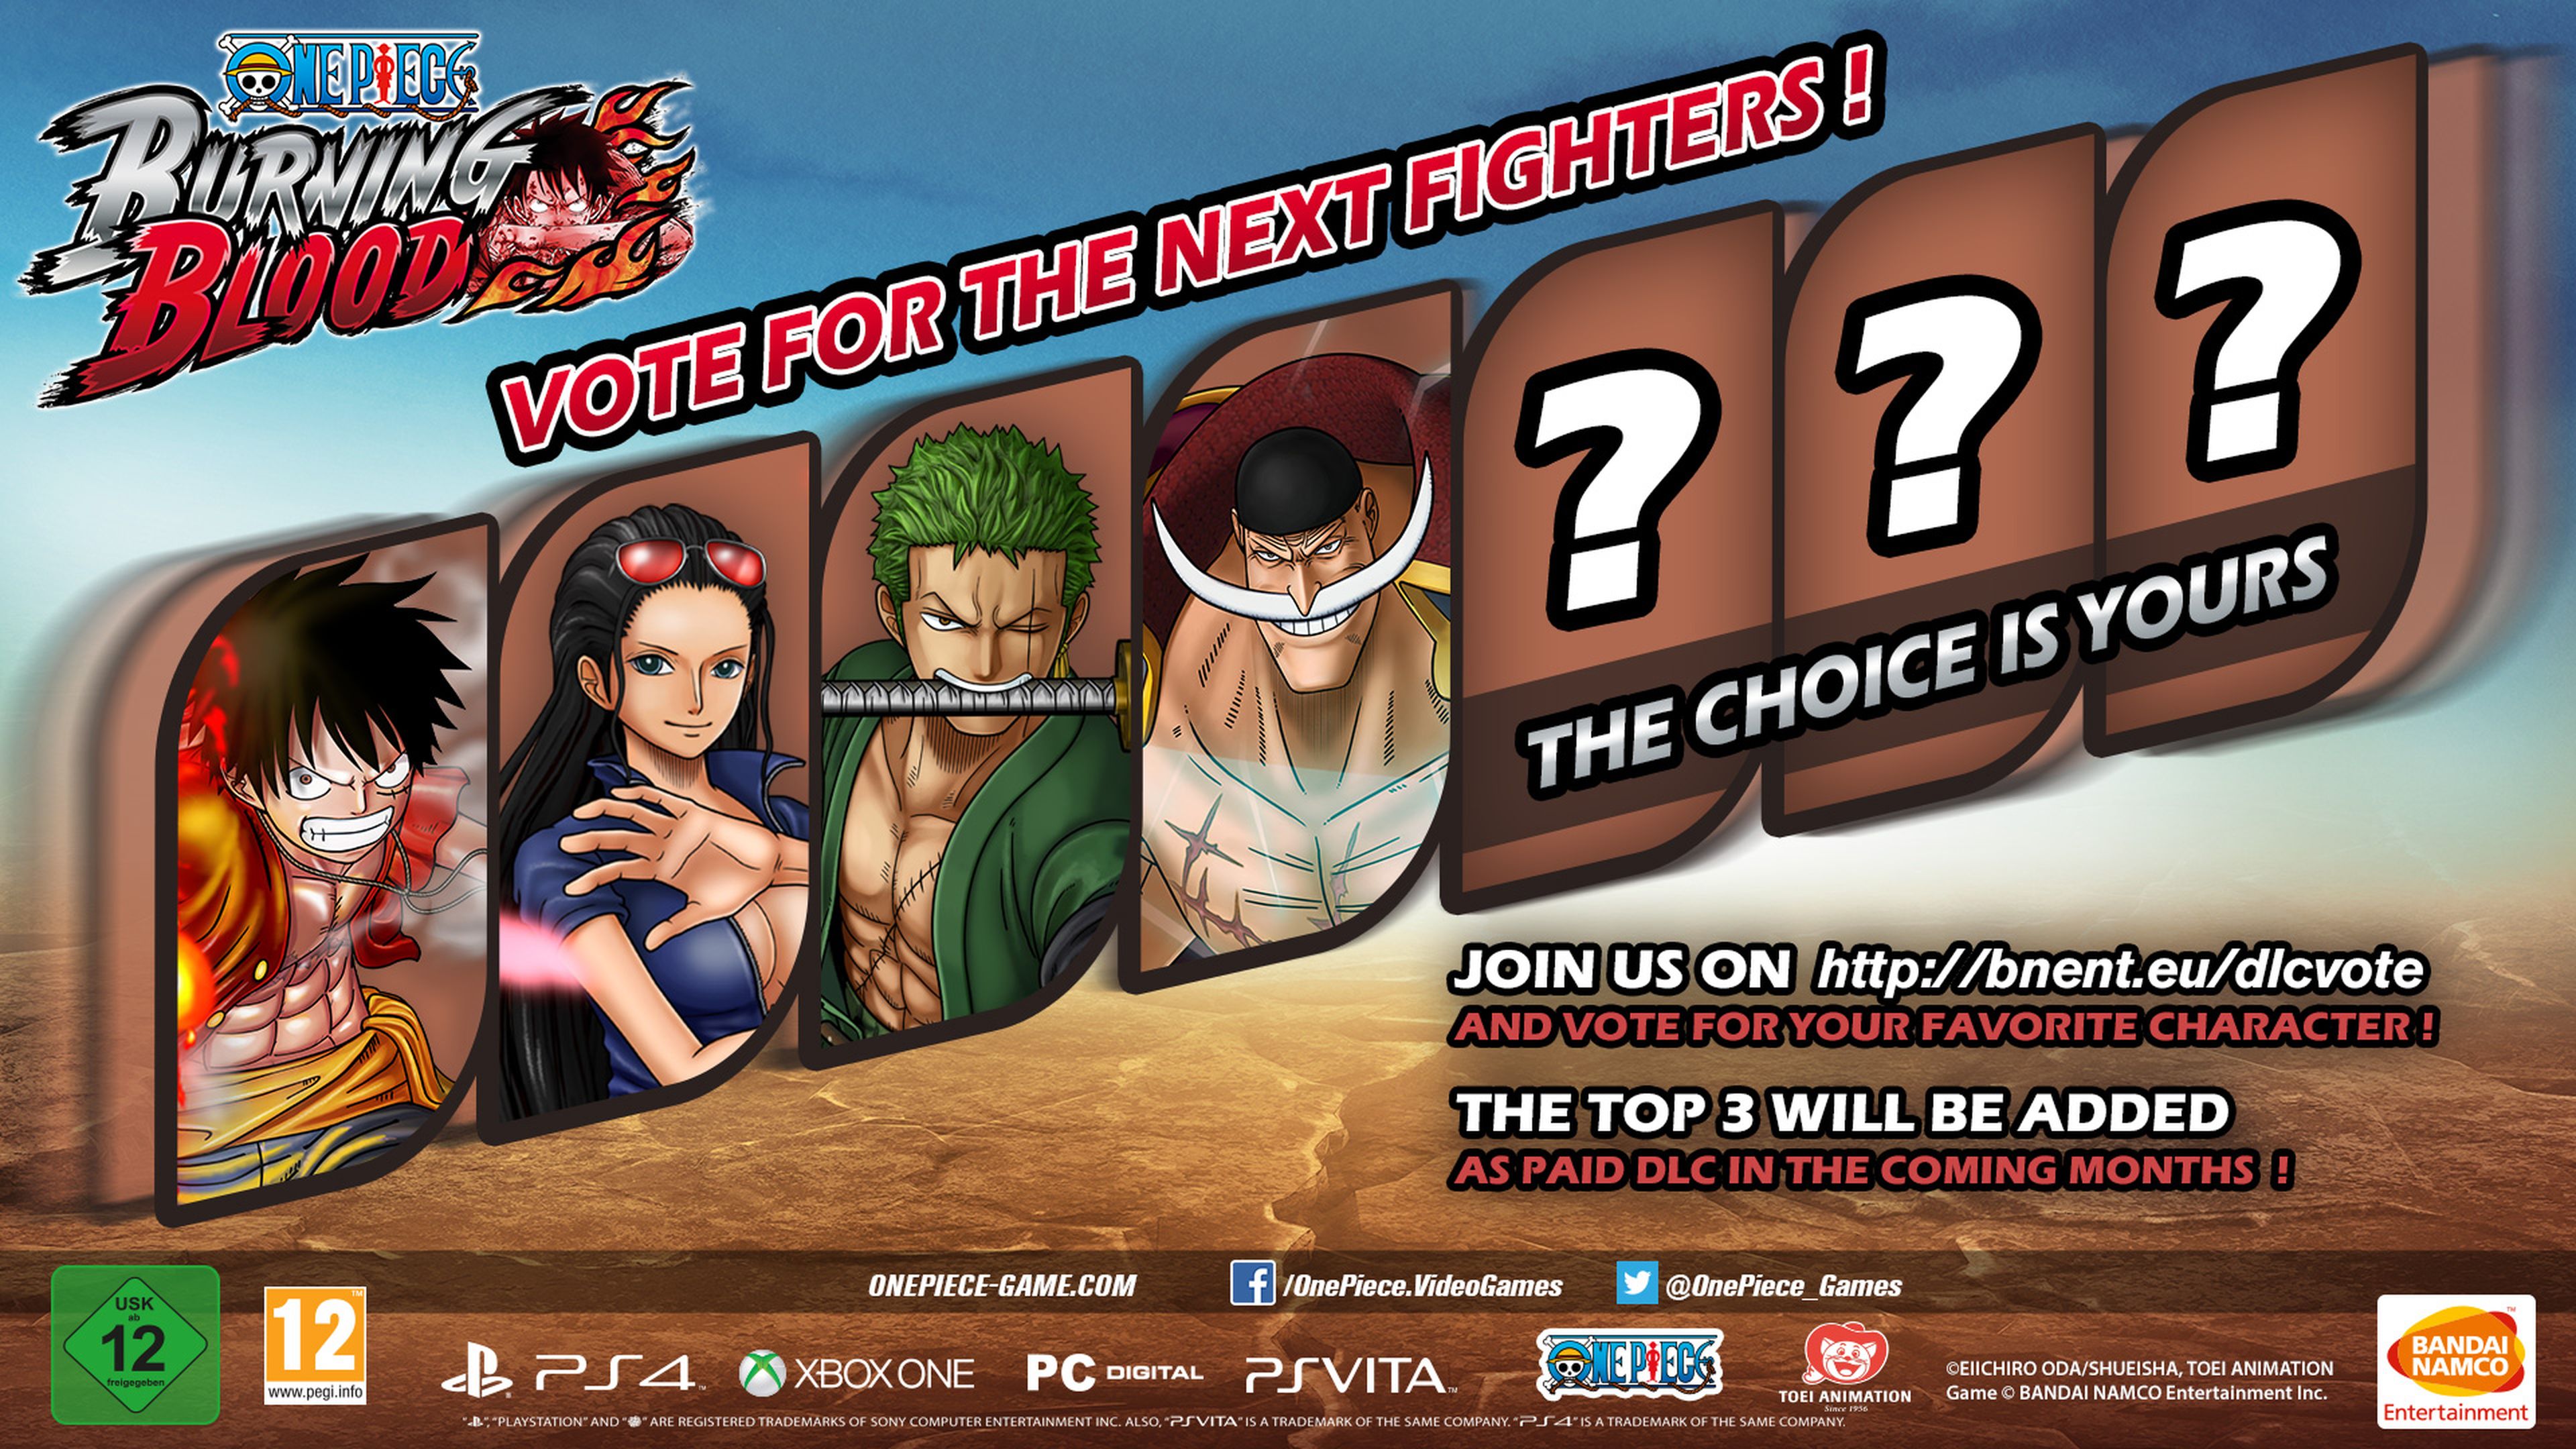 One Piece Burning Blood - PS4_XB1_PC_PS Vita - Vote for the next fighters